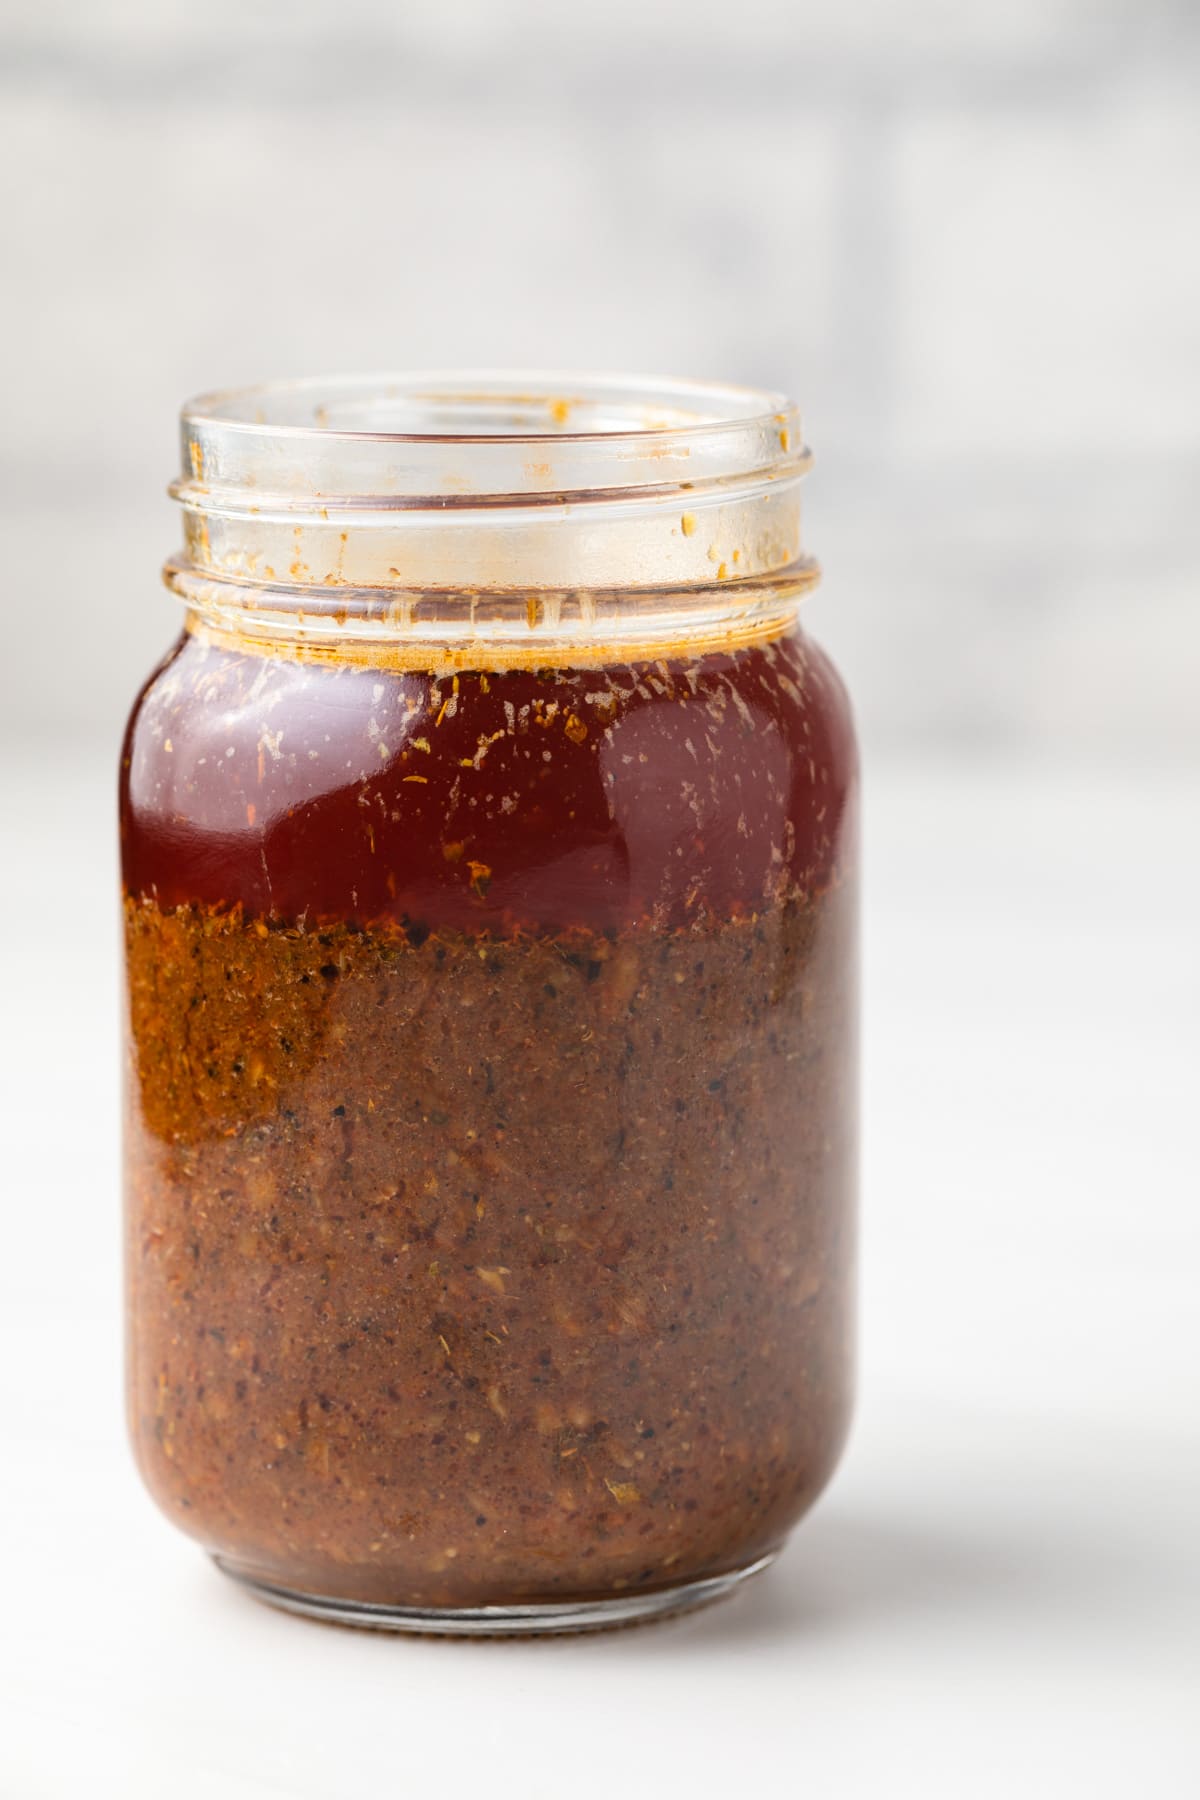 Boiling crab sauce in a glass jar.